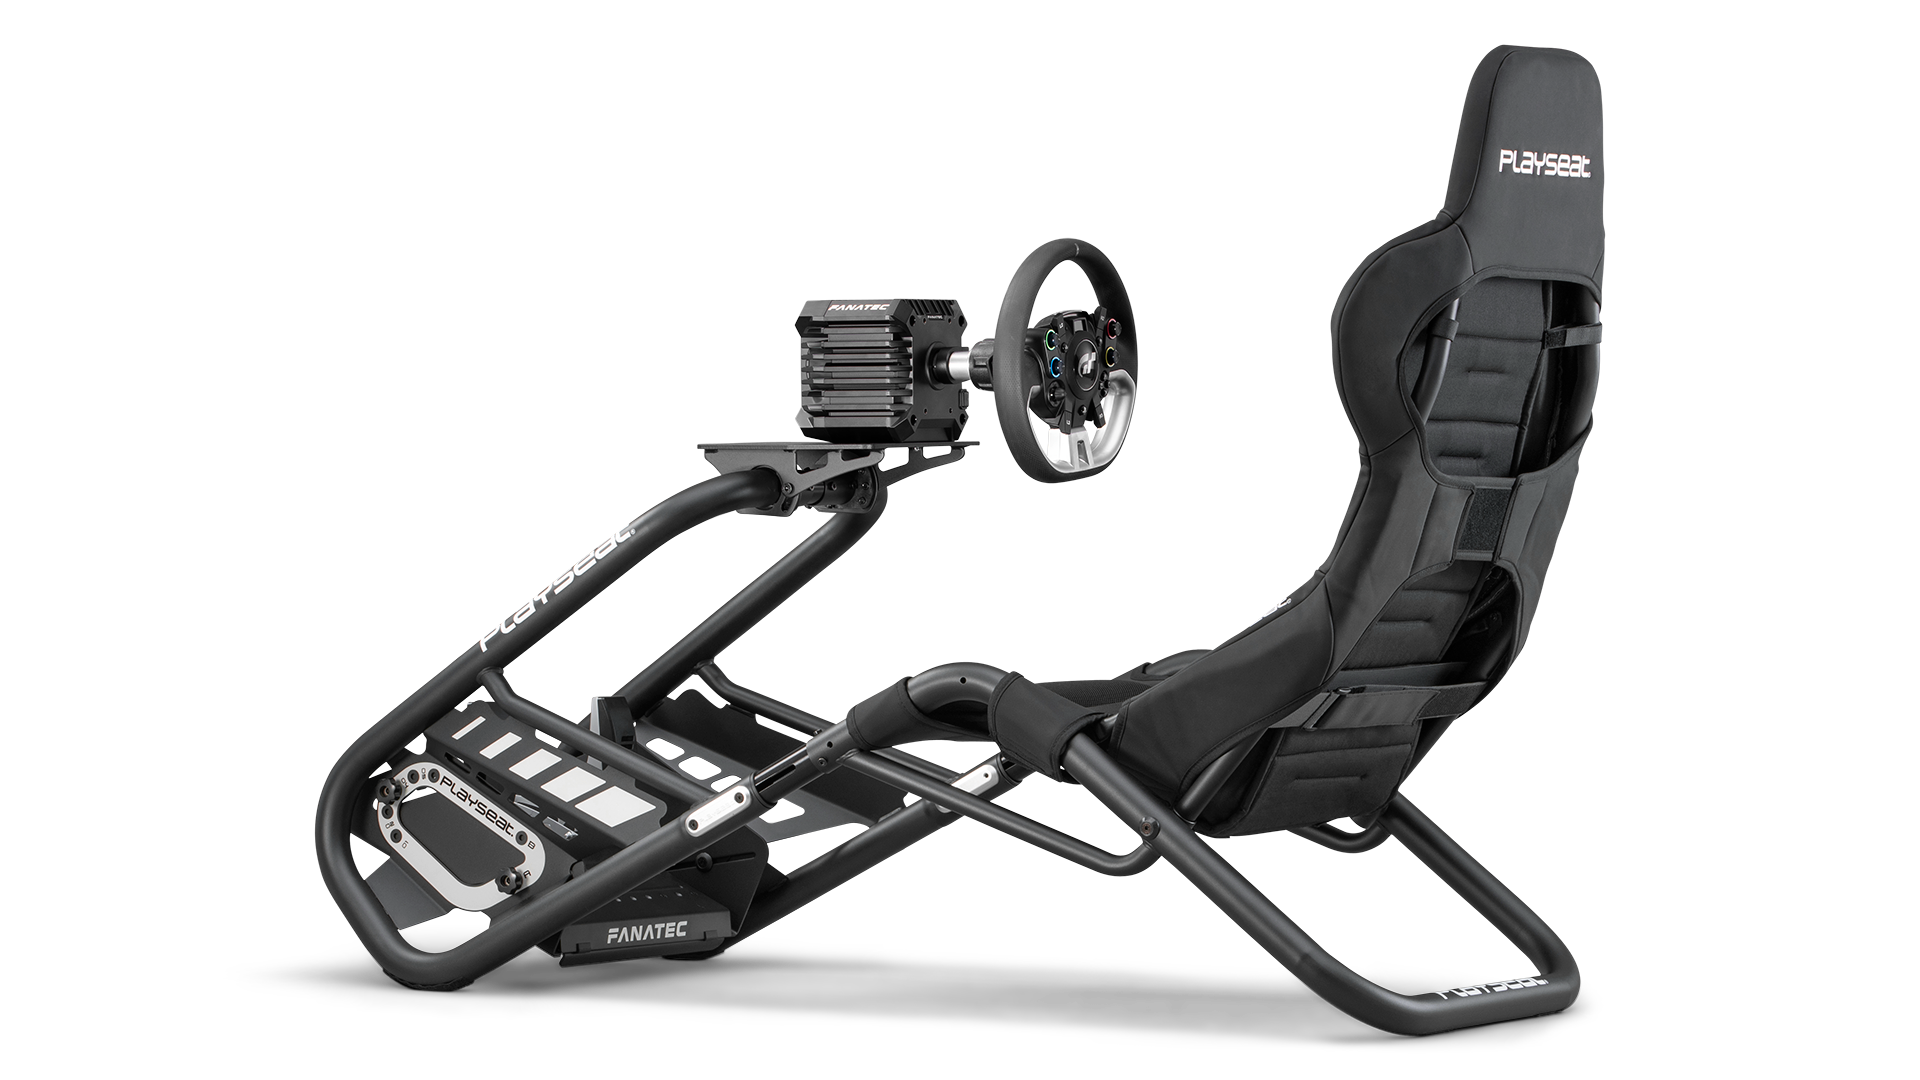 playseat-trophy-black-direct-drive-simulator-back-angle-view-fanatec-1920x1080-5.png